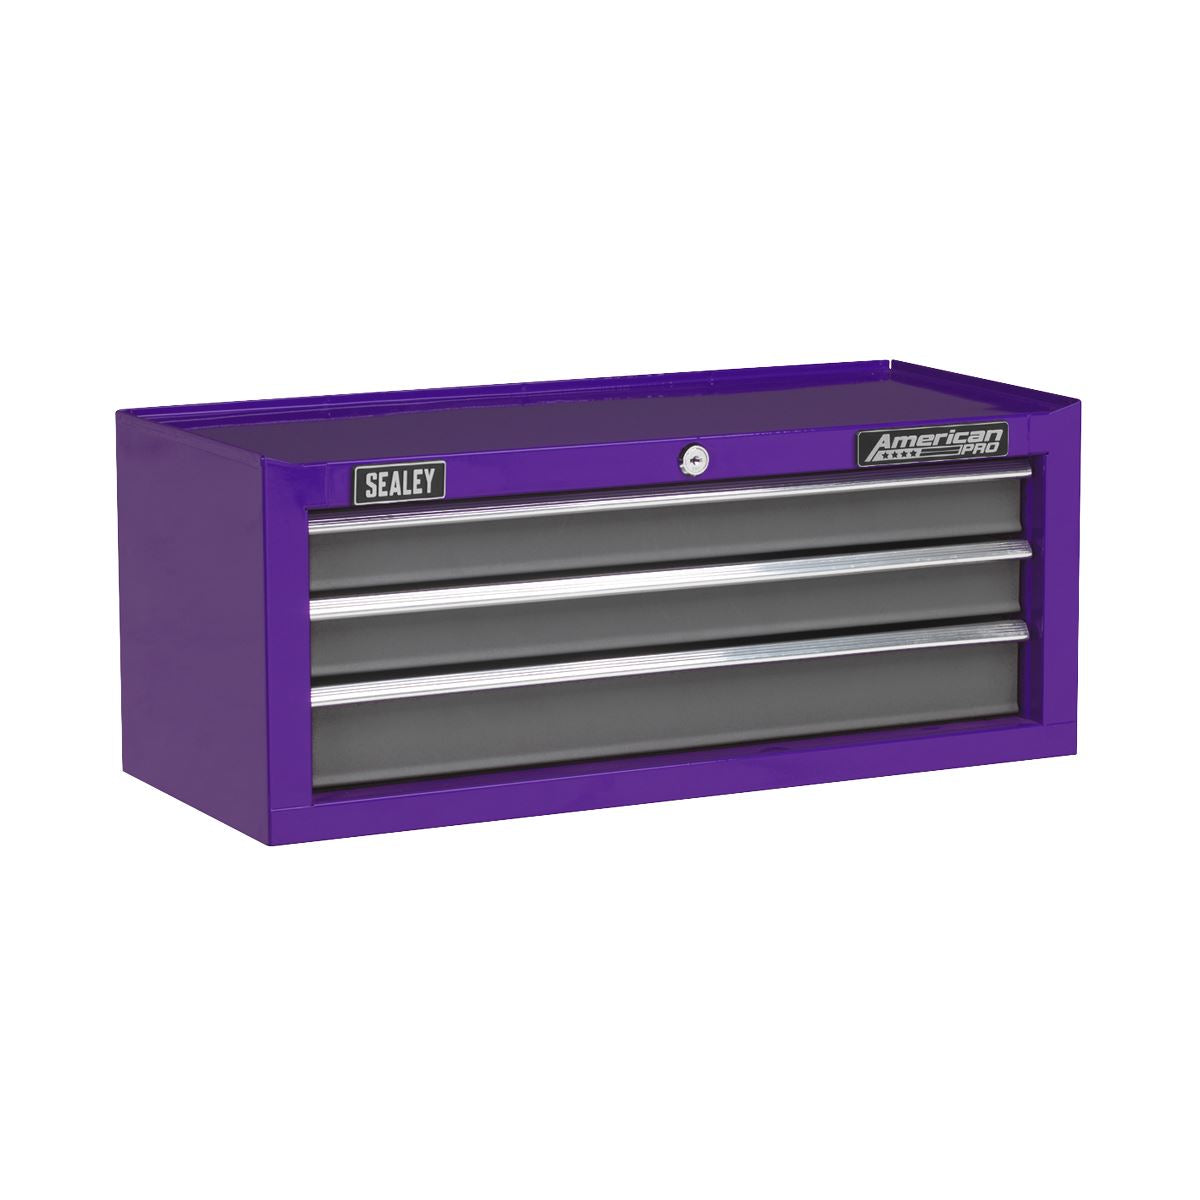 Sealey American Pro Mid-Box Tool Chest 3 Drawer with Ball-Bearing Slides - Purple/Grey